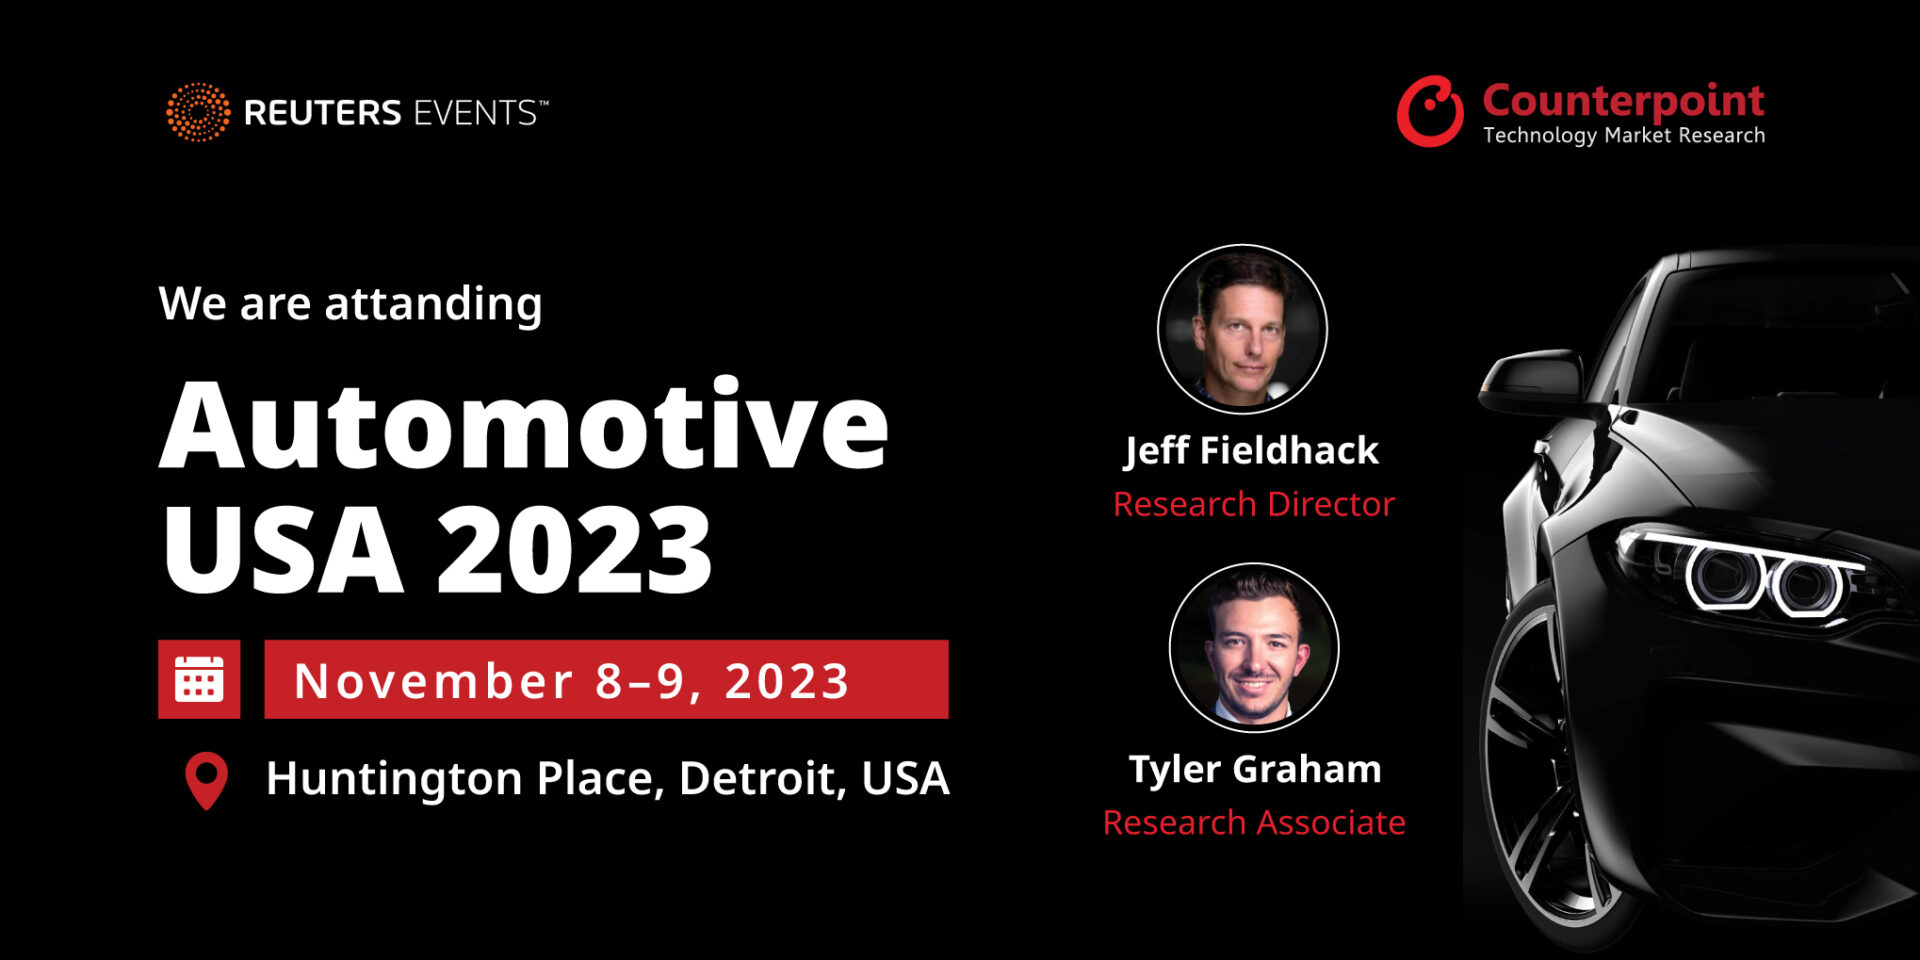 Announcement Poster for Counterpoint Research attending Automotive USA 2023